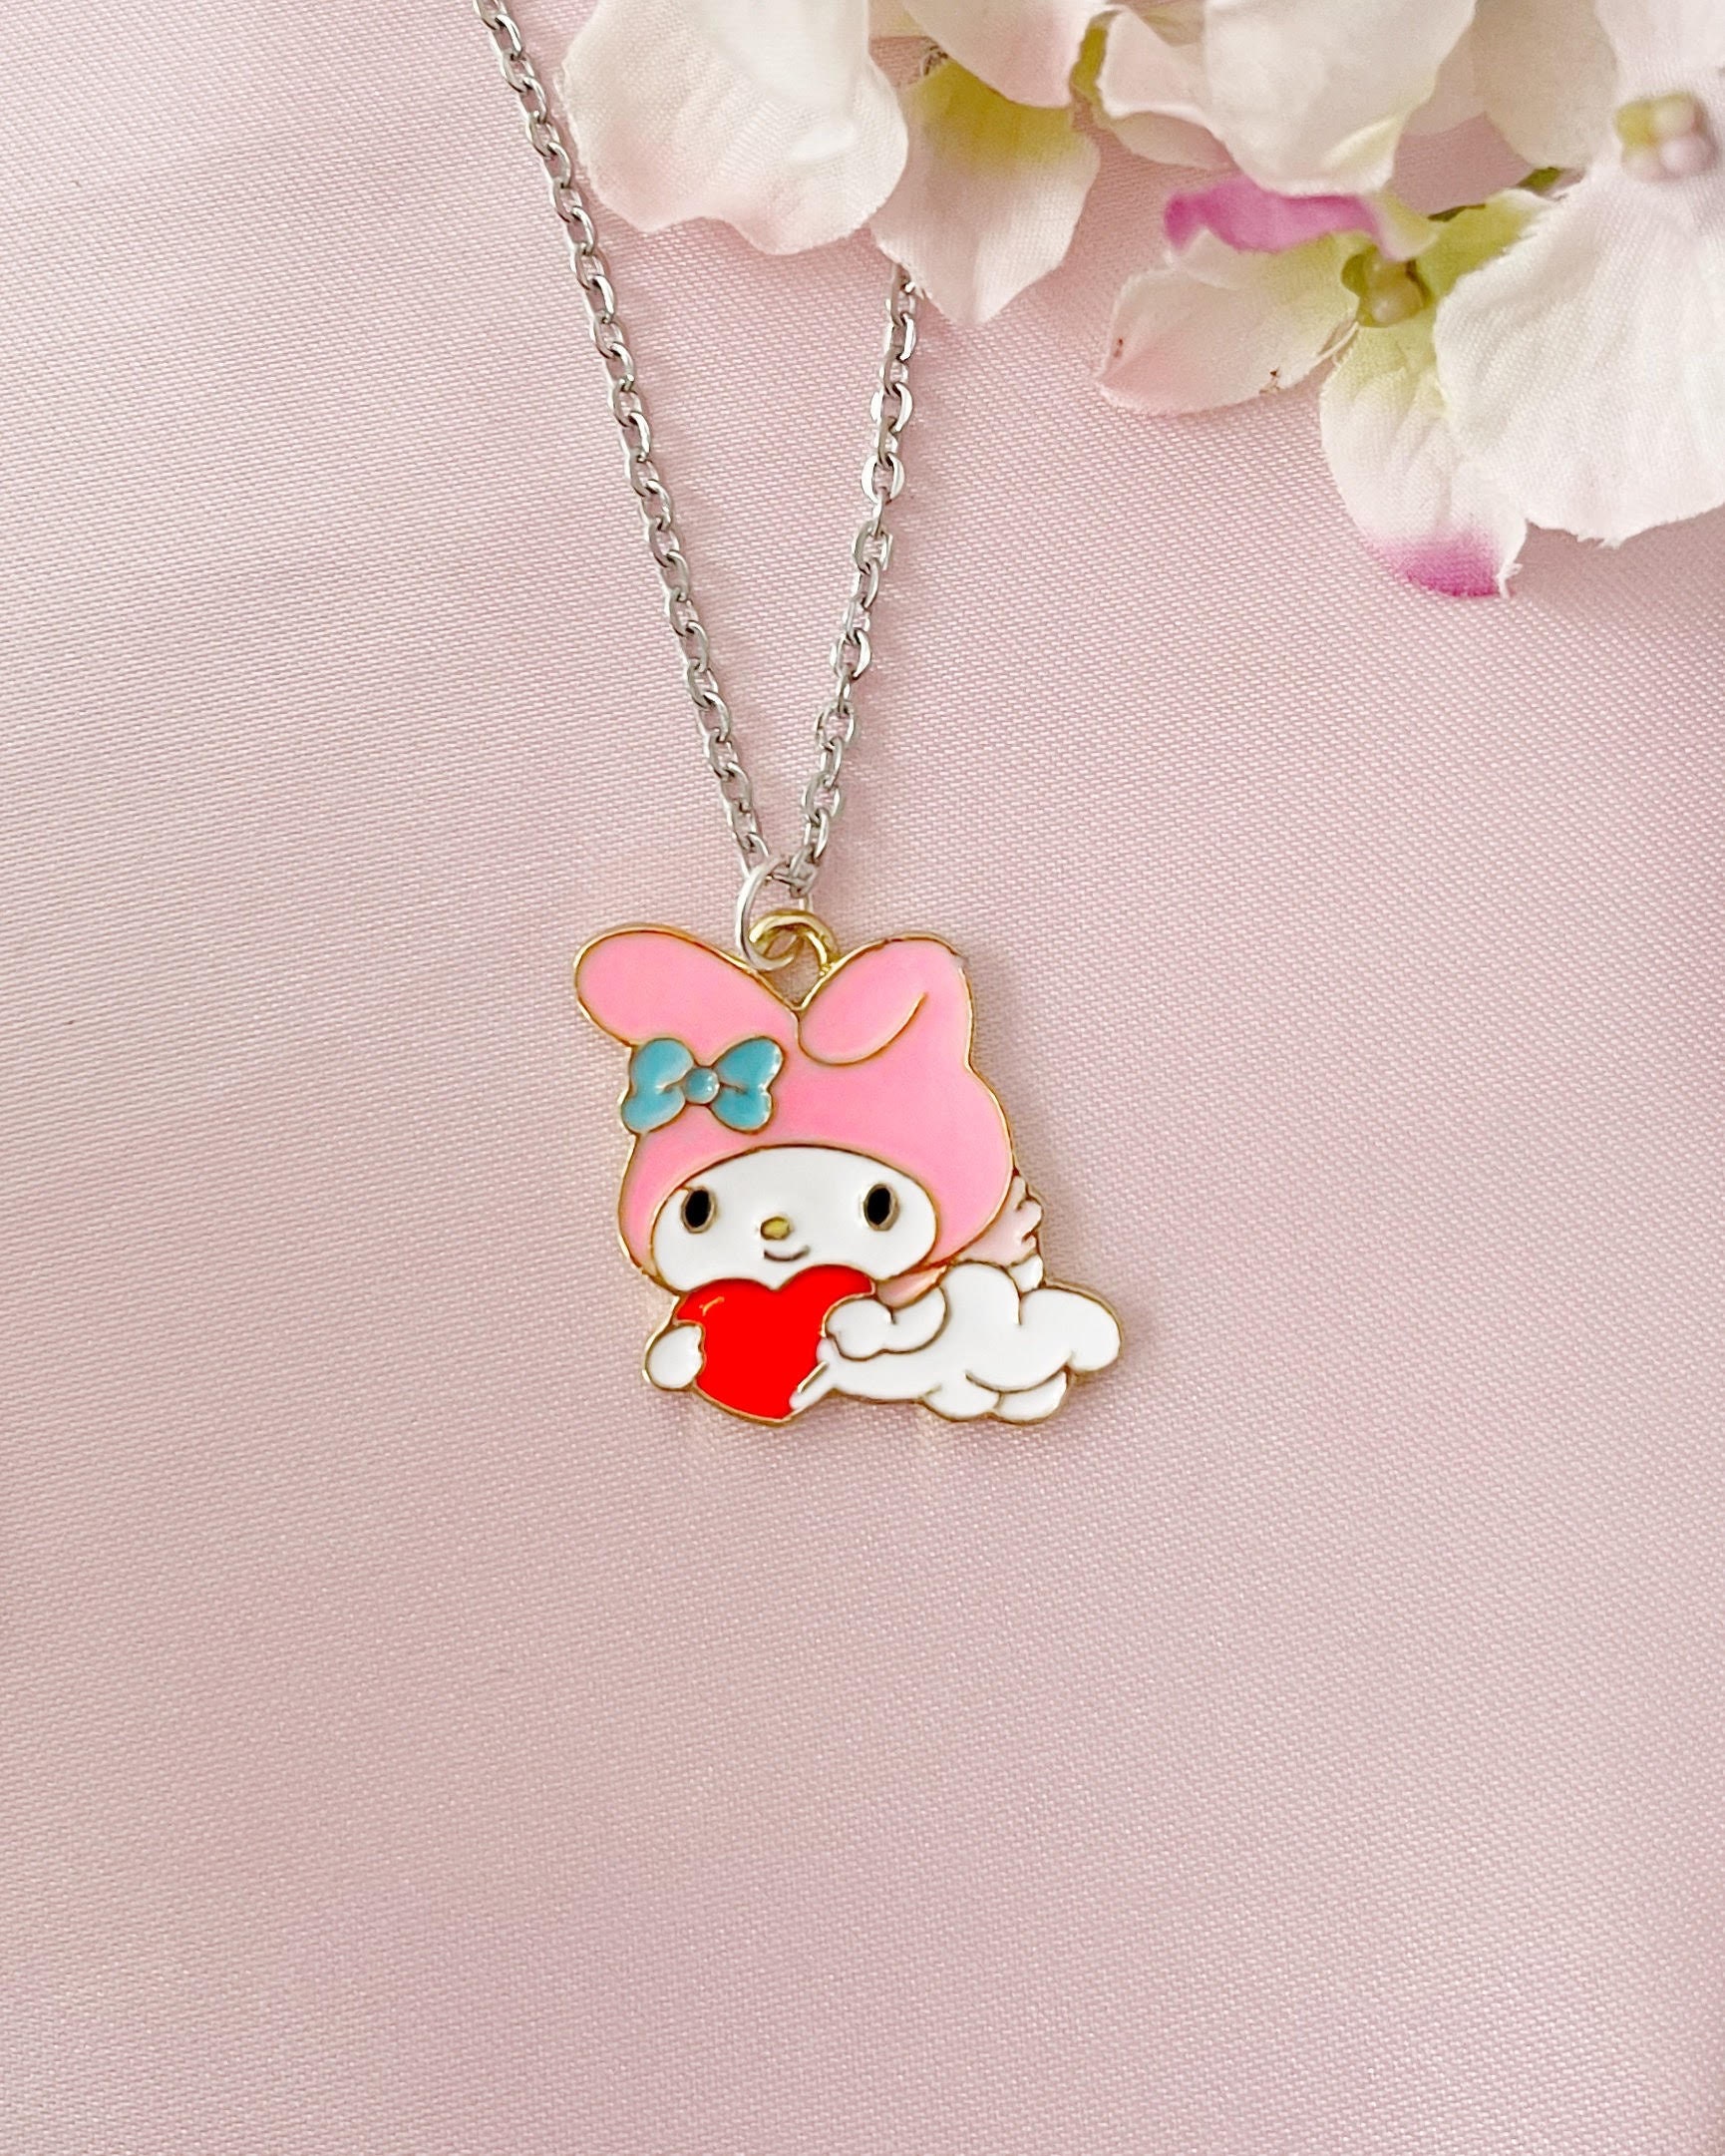 Matching Sanrio Necklaces Set, My Melody and Kuromi, Kawaii Adorable Unique  Gift for Bestfriend/bffs/friendship/couples, Sanrio Girl Gift 